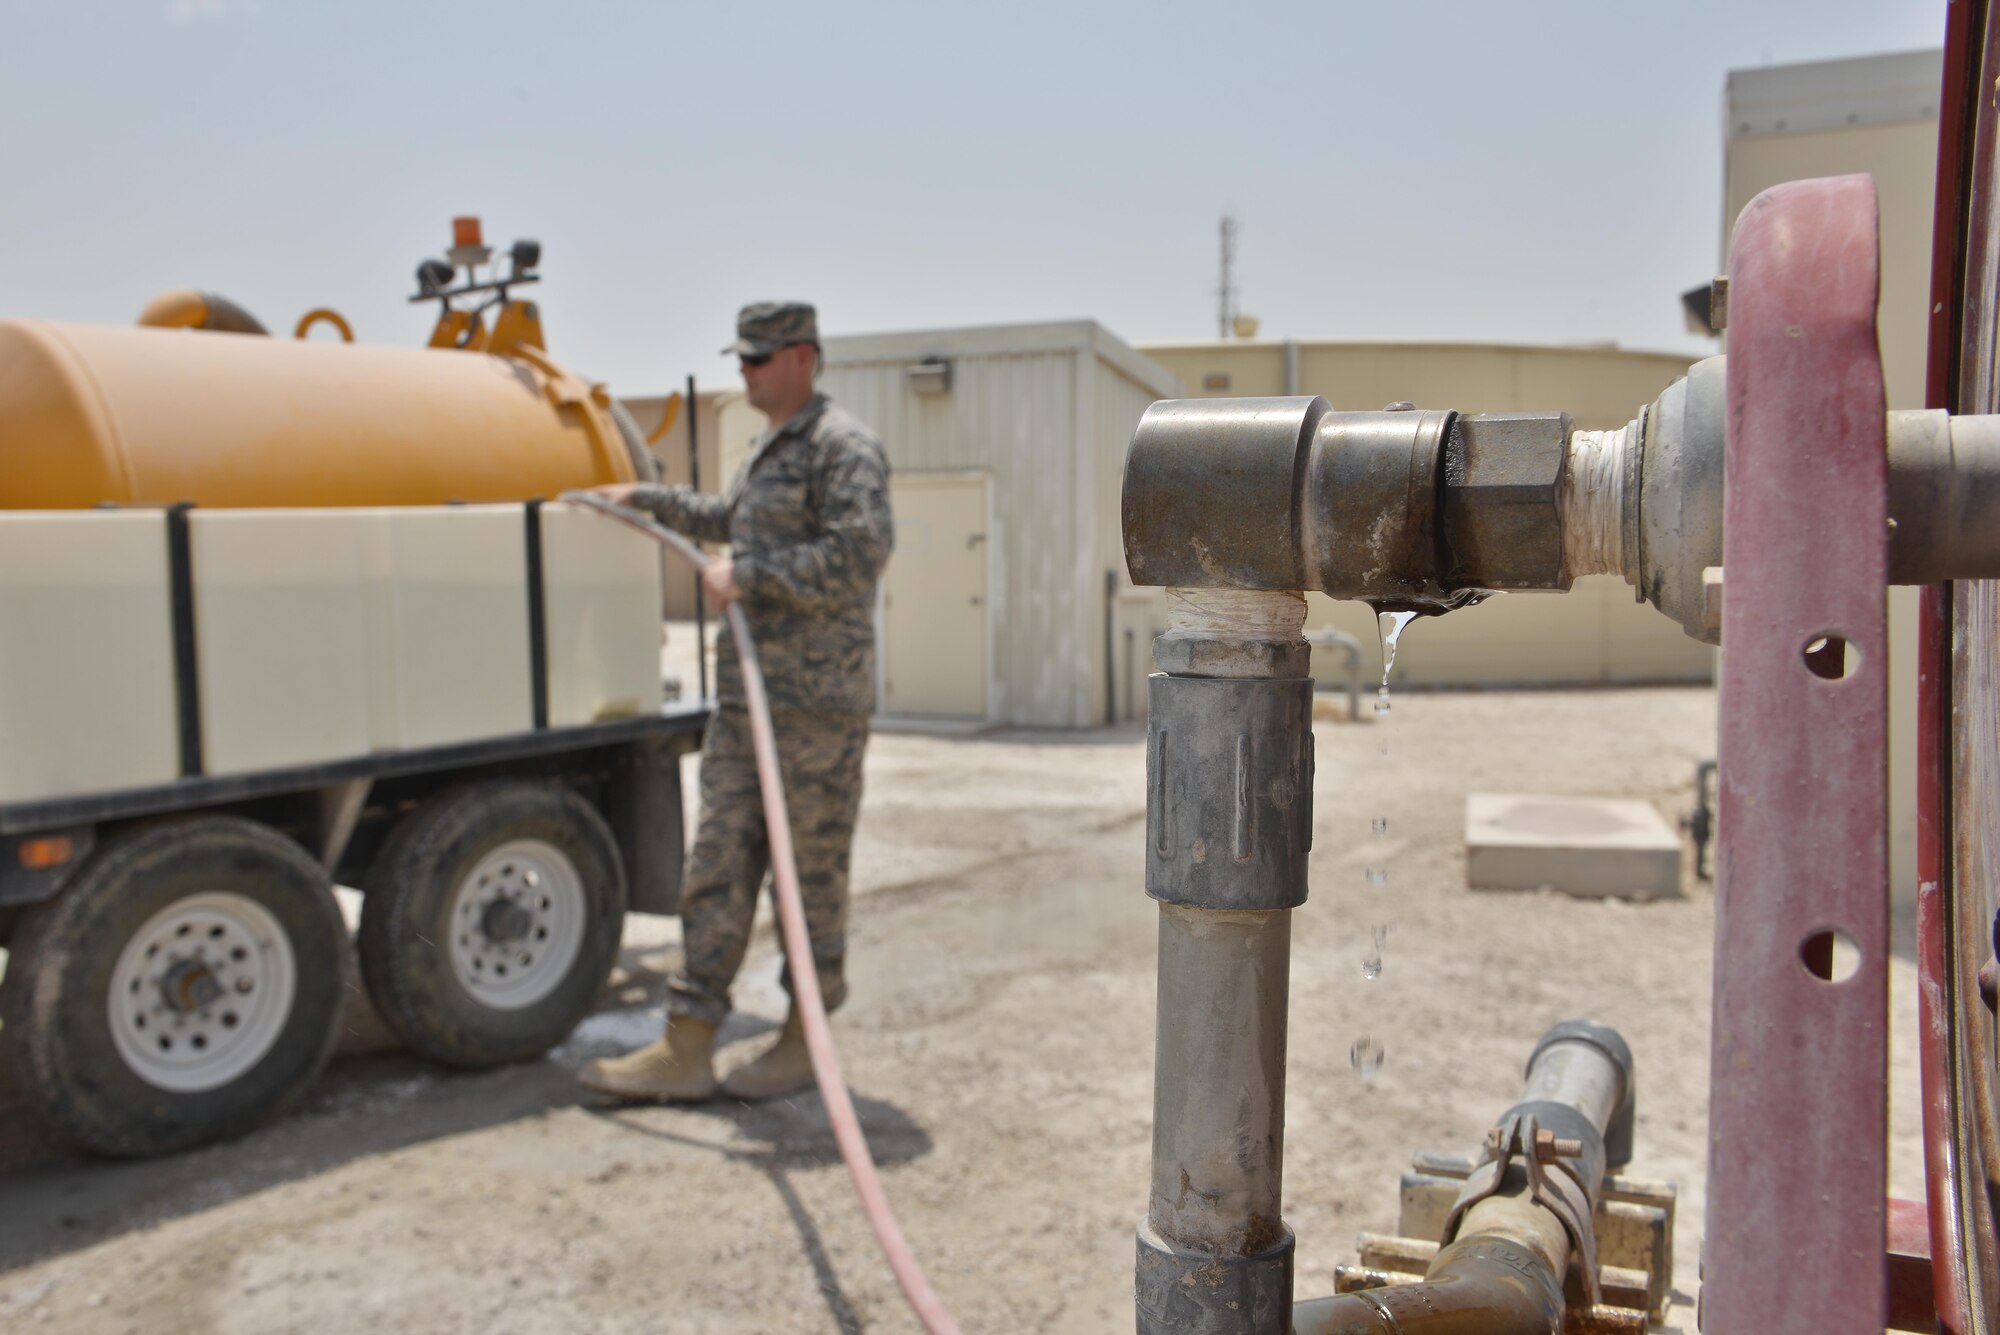 Airman 1st Class Joshua Rickerd, 379th Expeditionary Civil Engineer Squadron water and fuels, fills a reservoir with water prior to completing the daily lift station maintenance August 14, 2015 at Al Udeid Air Base, Qatar. Waste water is tested and monitored daily to ensure the systems are running smoothly and do not back up. With the high number of deployed members here at Al Udeid, the 379th ECES water and fuels airmen stay busy day and night keeping the systems running to support the base. (U.S. Air Force photo/ Staff Sgt. Alexandre Montes)